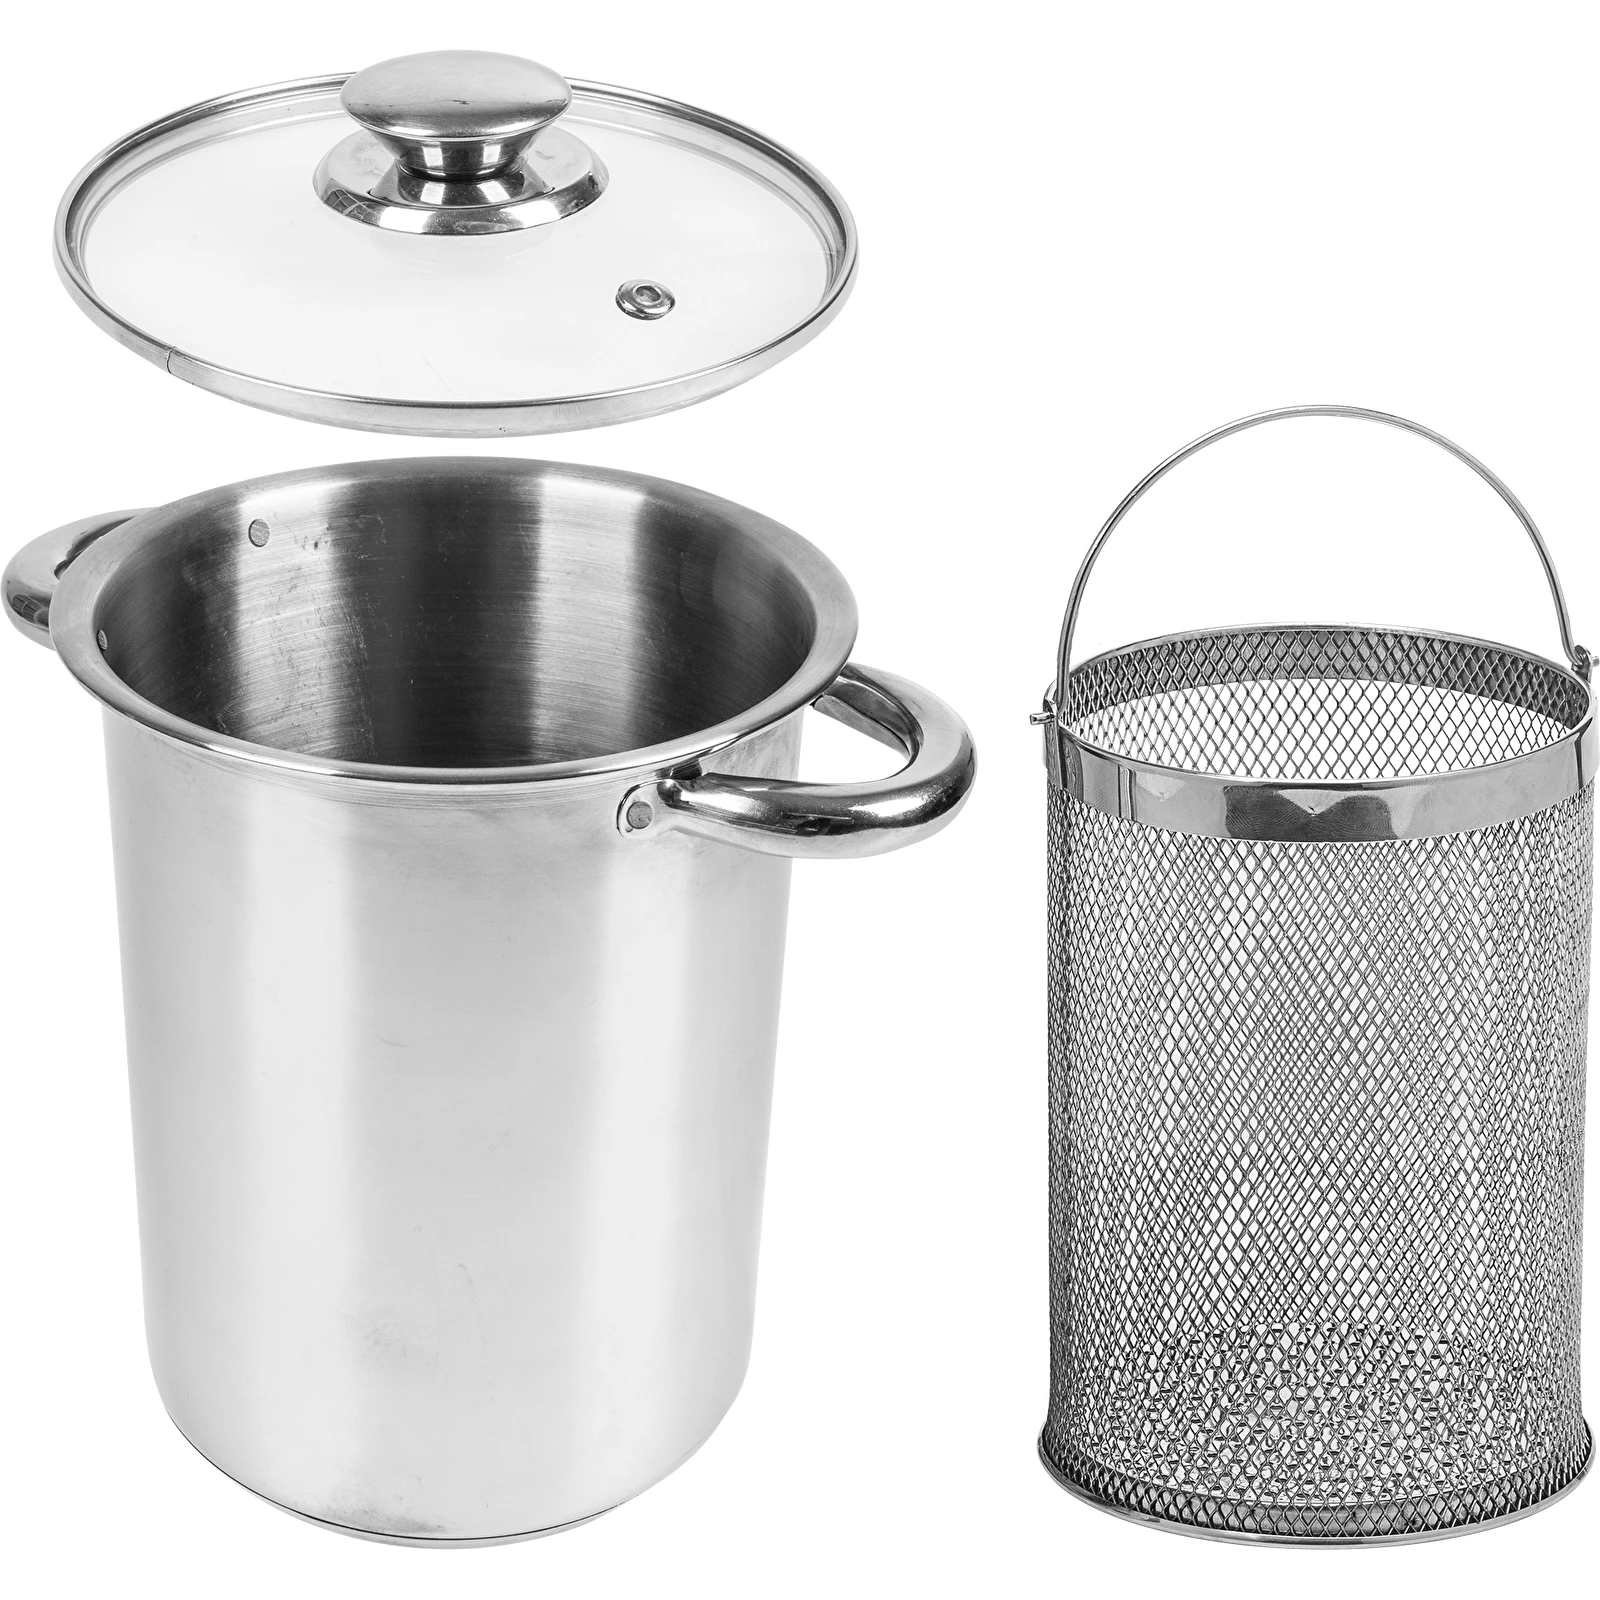 Multifunctional Pot with Basket & Ham Maker Stainless Steel 313515